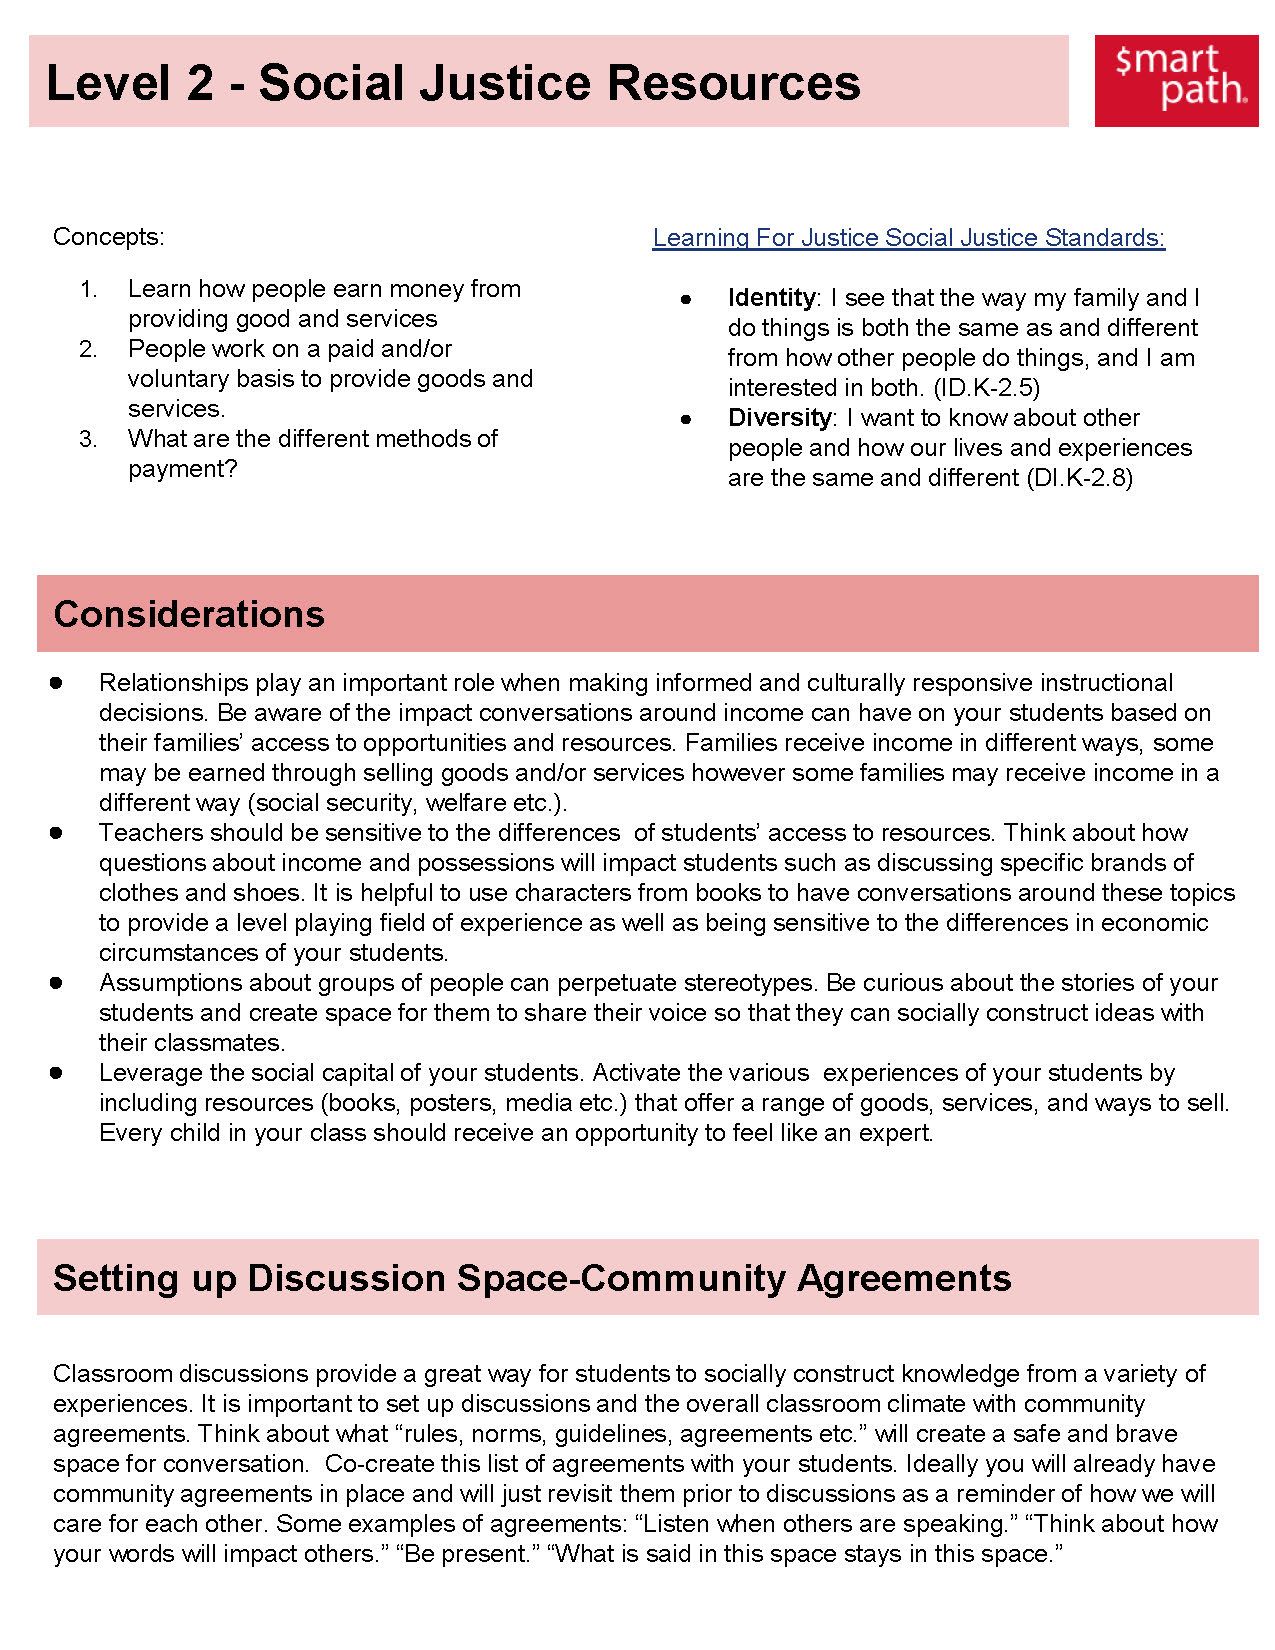 Smart Path Social Justice Resource Level 2_Page_1